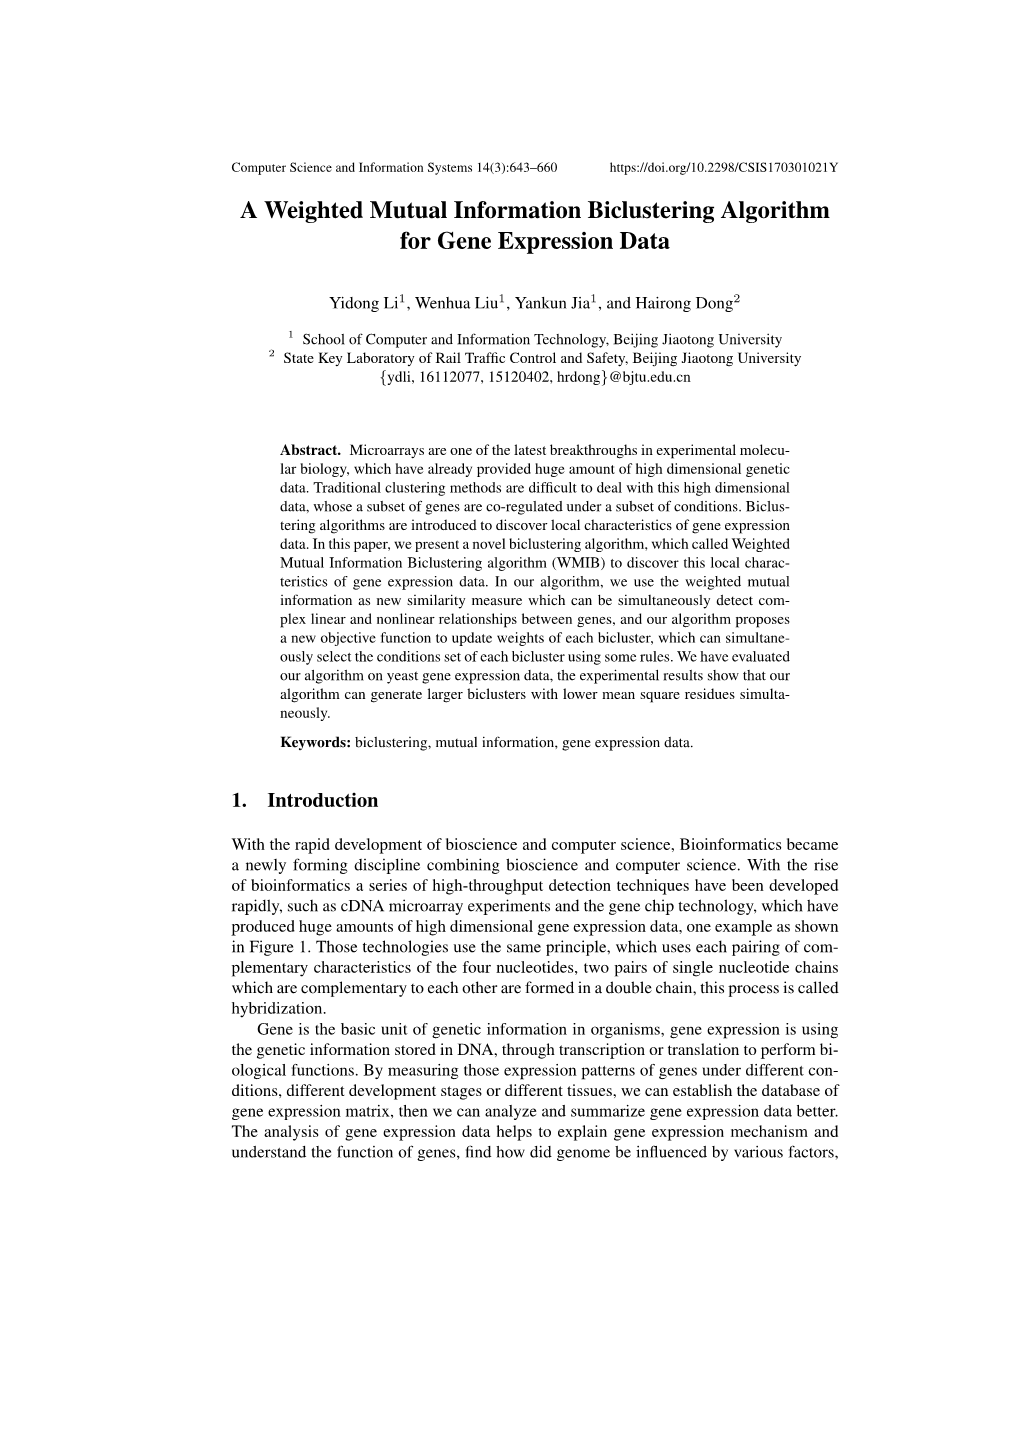 A Weighted Mutual Information Biclustering Algorithm for Gene Expression Data